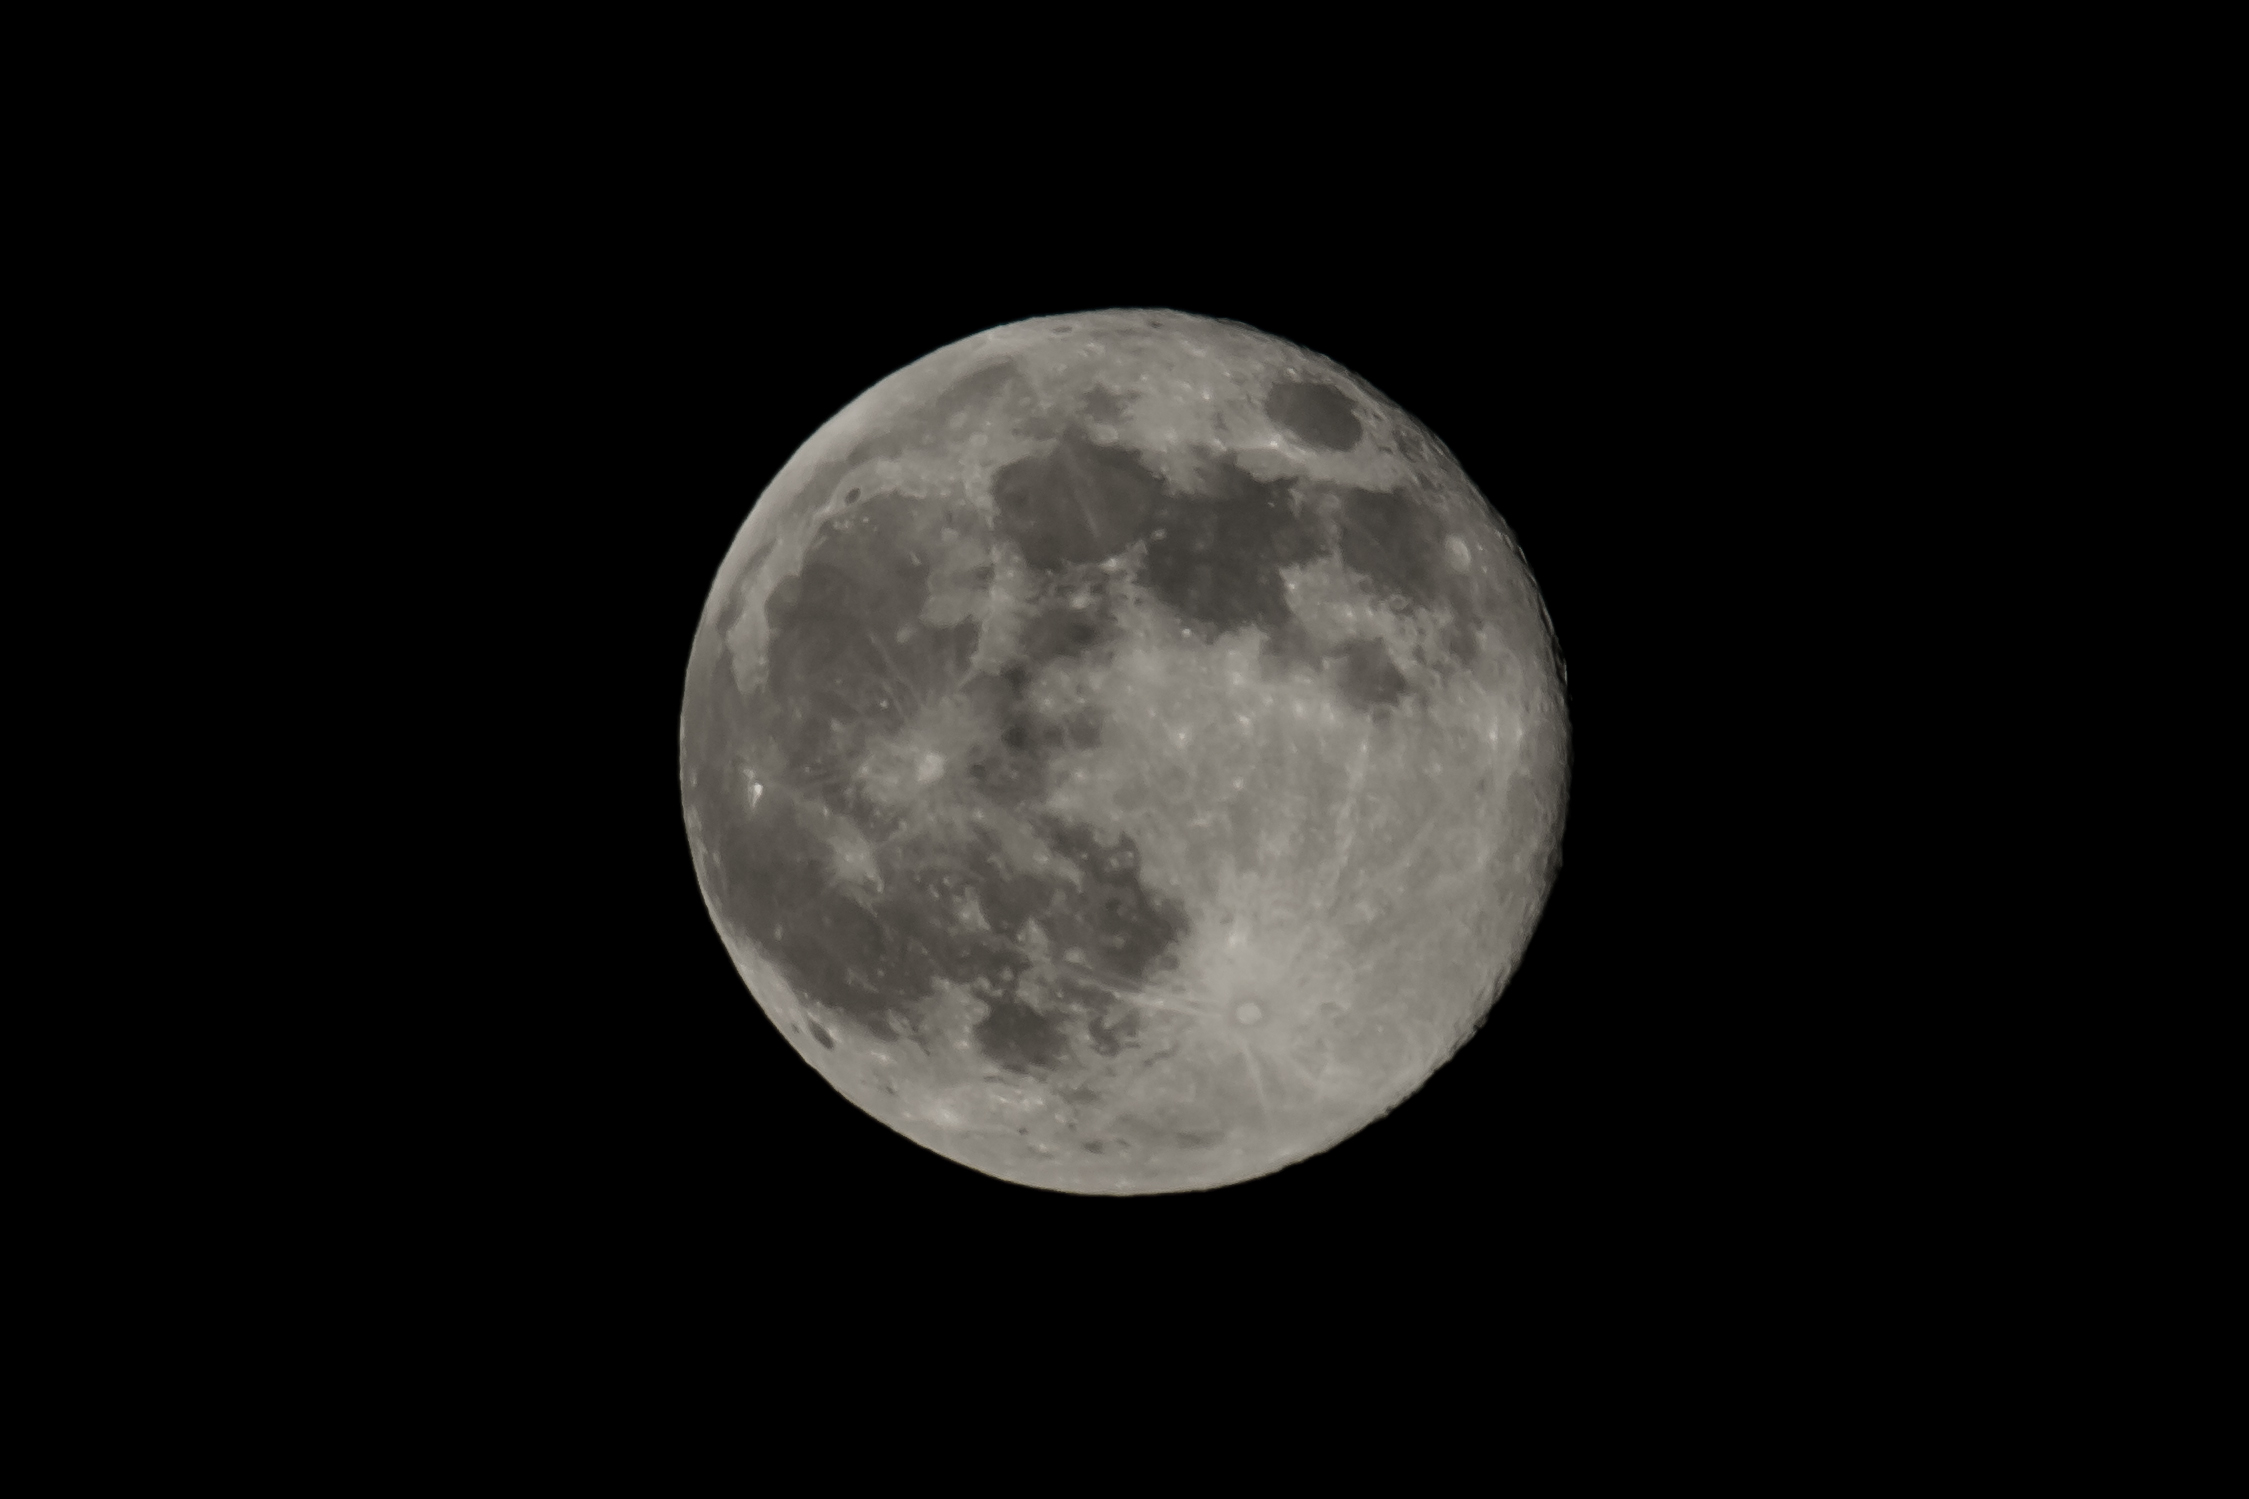 A gray Moon dotted with its darker maria against a black background.